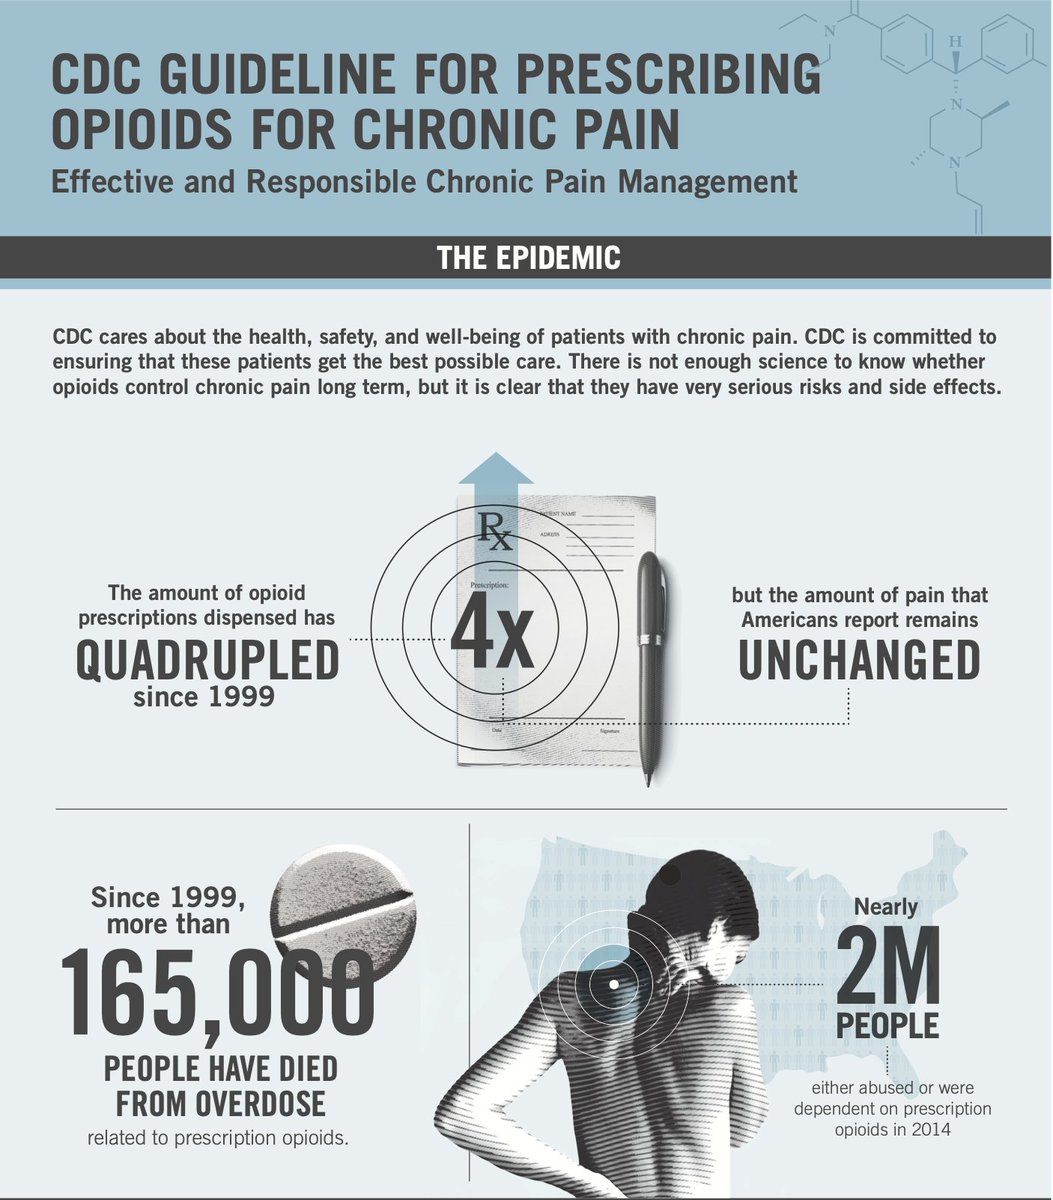 Well, in 2016 we had this nightmare:"CDC Guideline for Prescribing Opioids for Chronic Pain, United States, 2016" https://www.cdc.gov/mmwr/volumes/65/rr/pdfs/rr6501e1.pdf